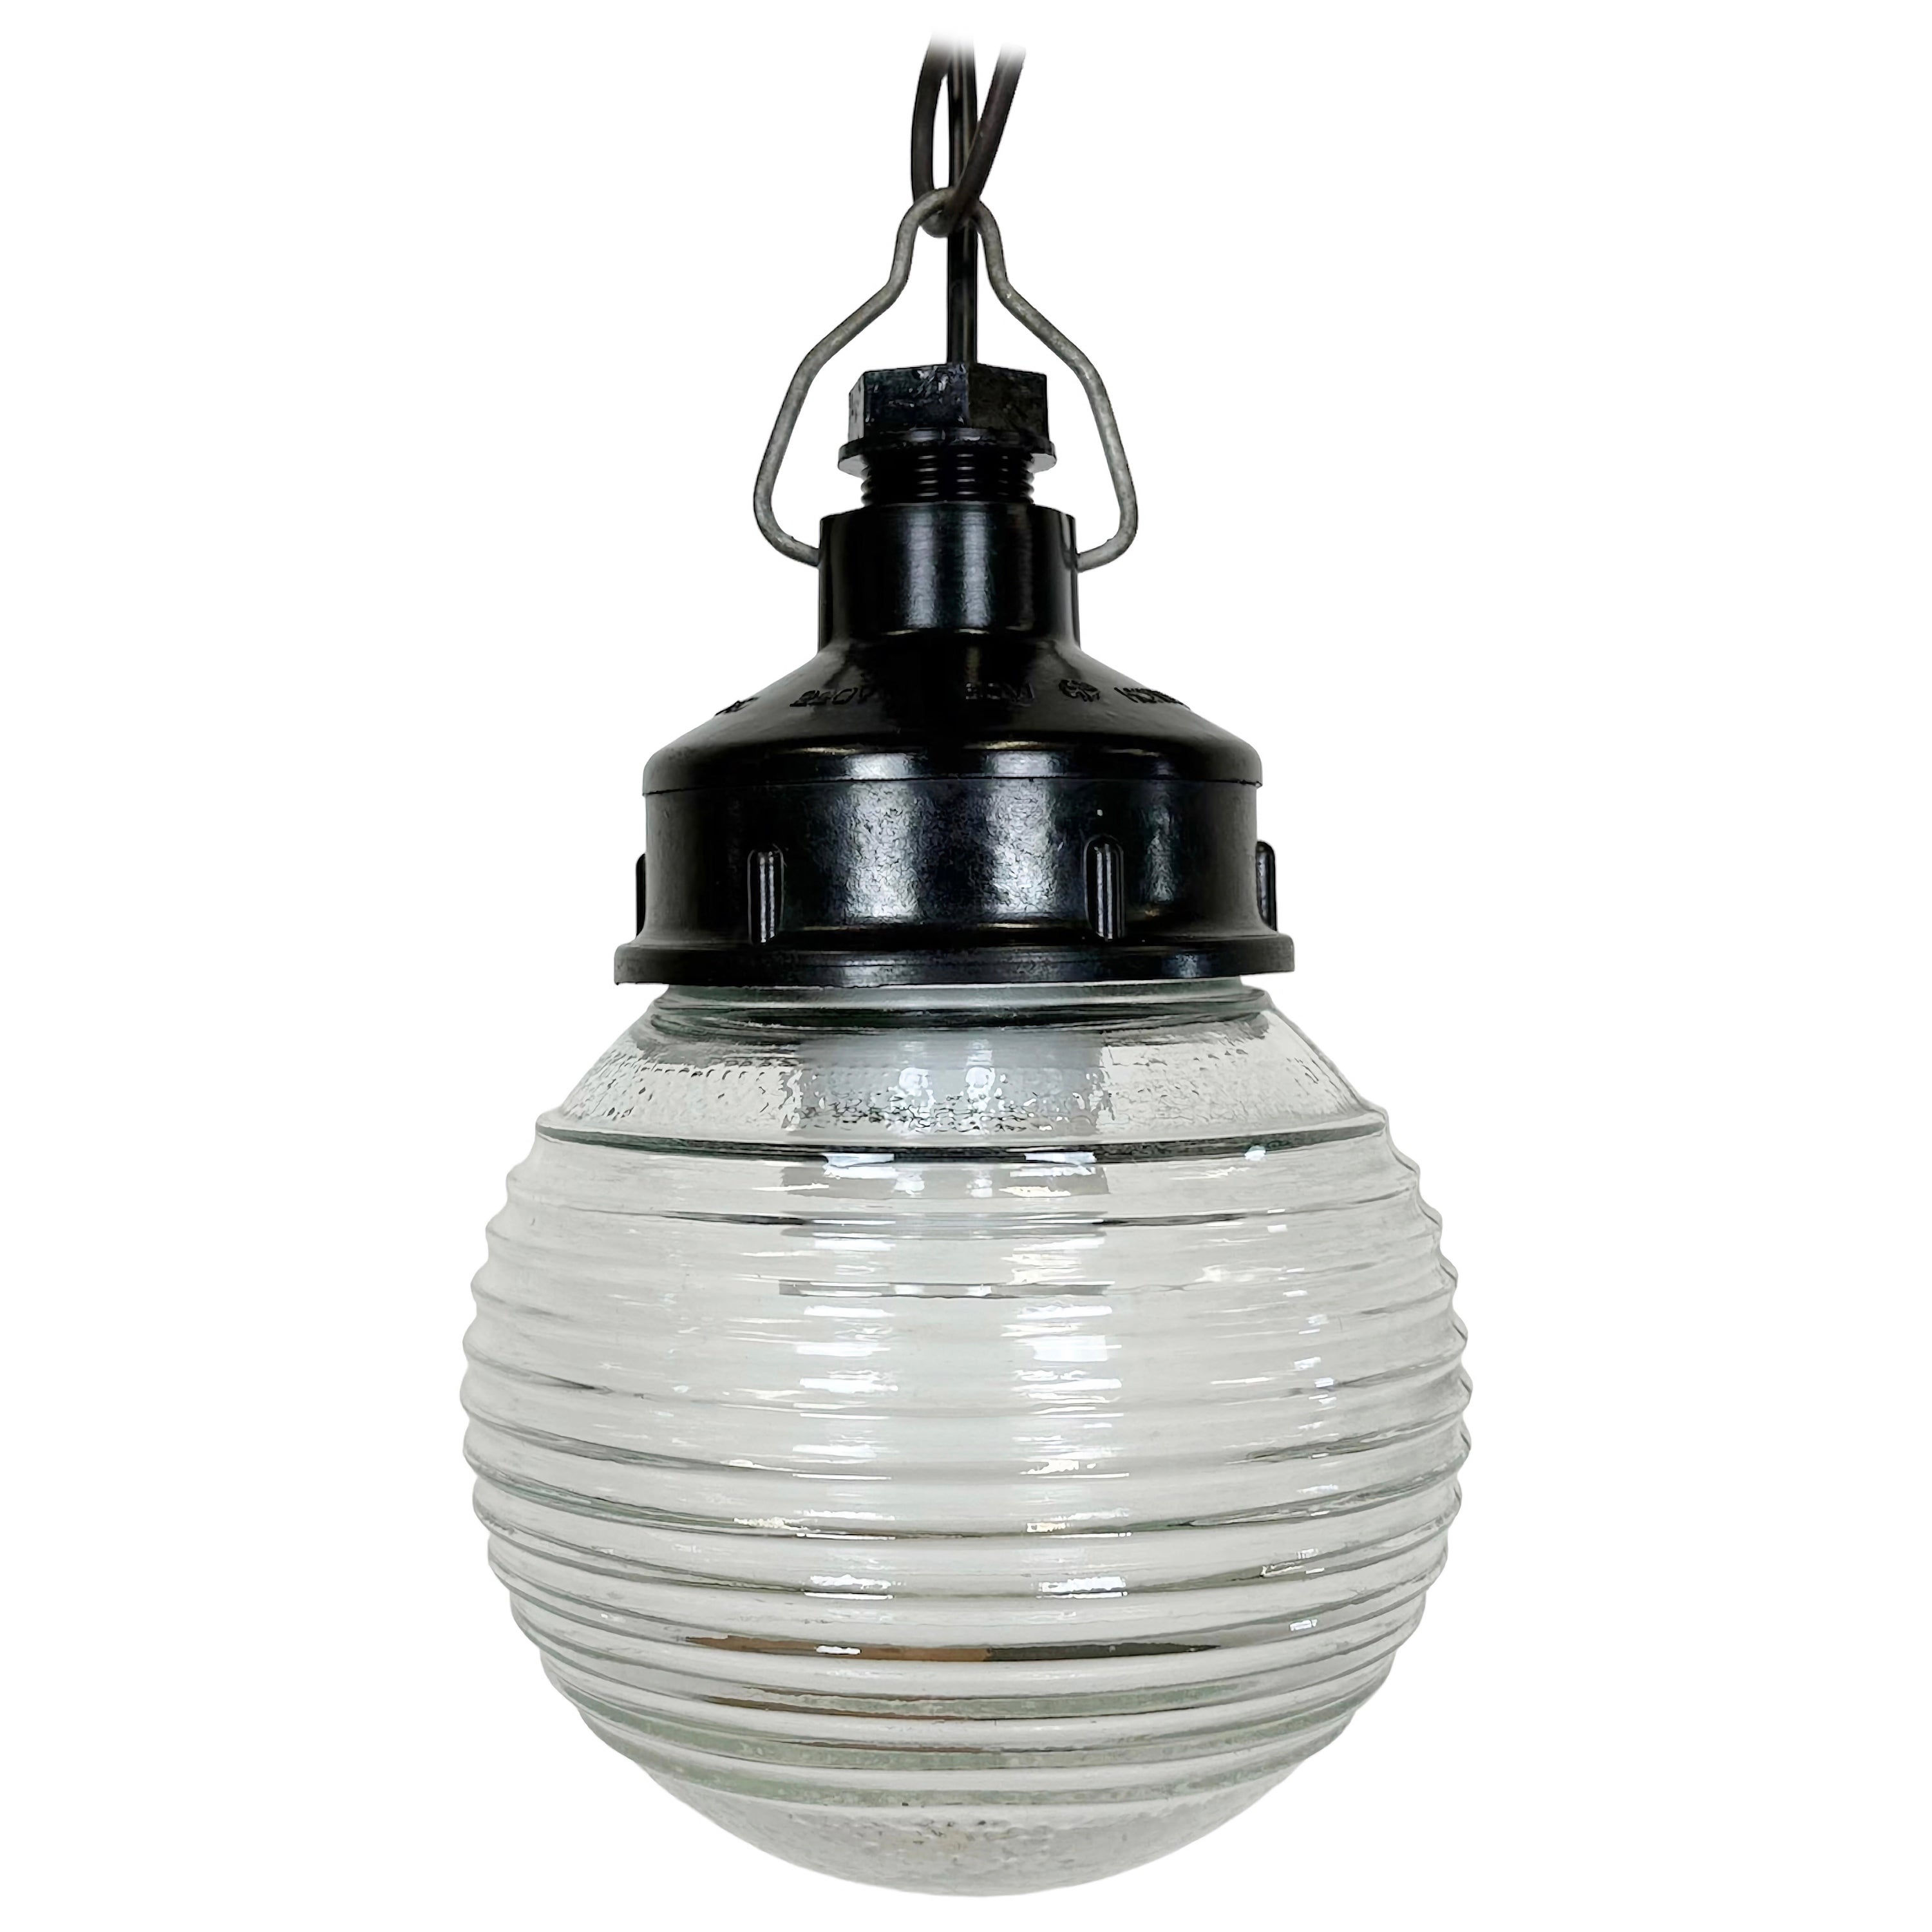 Industrial Bakelite Pendant Light with Ribbed Glass, 1970s